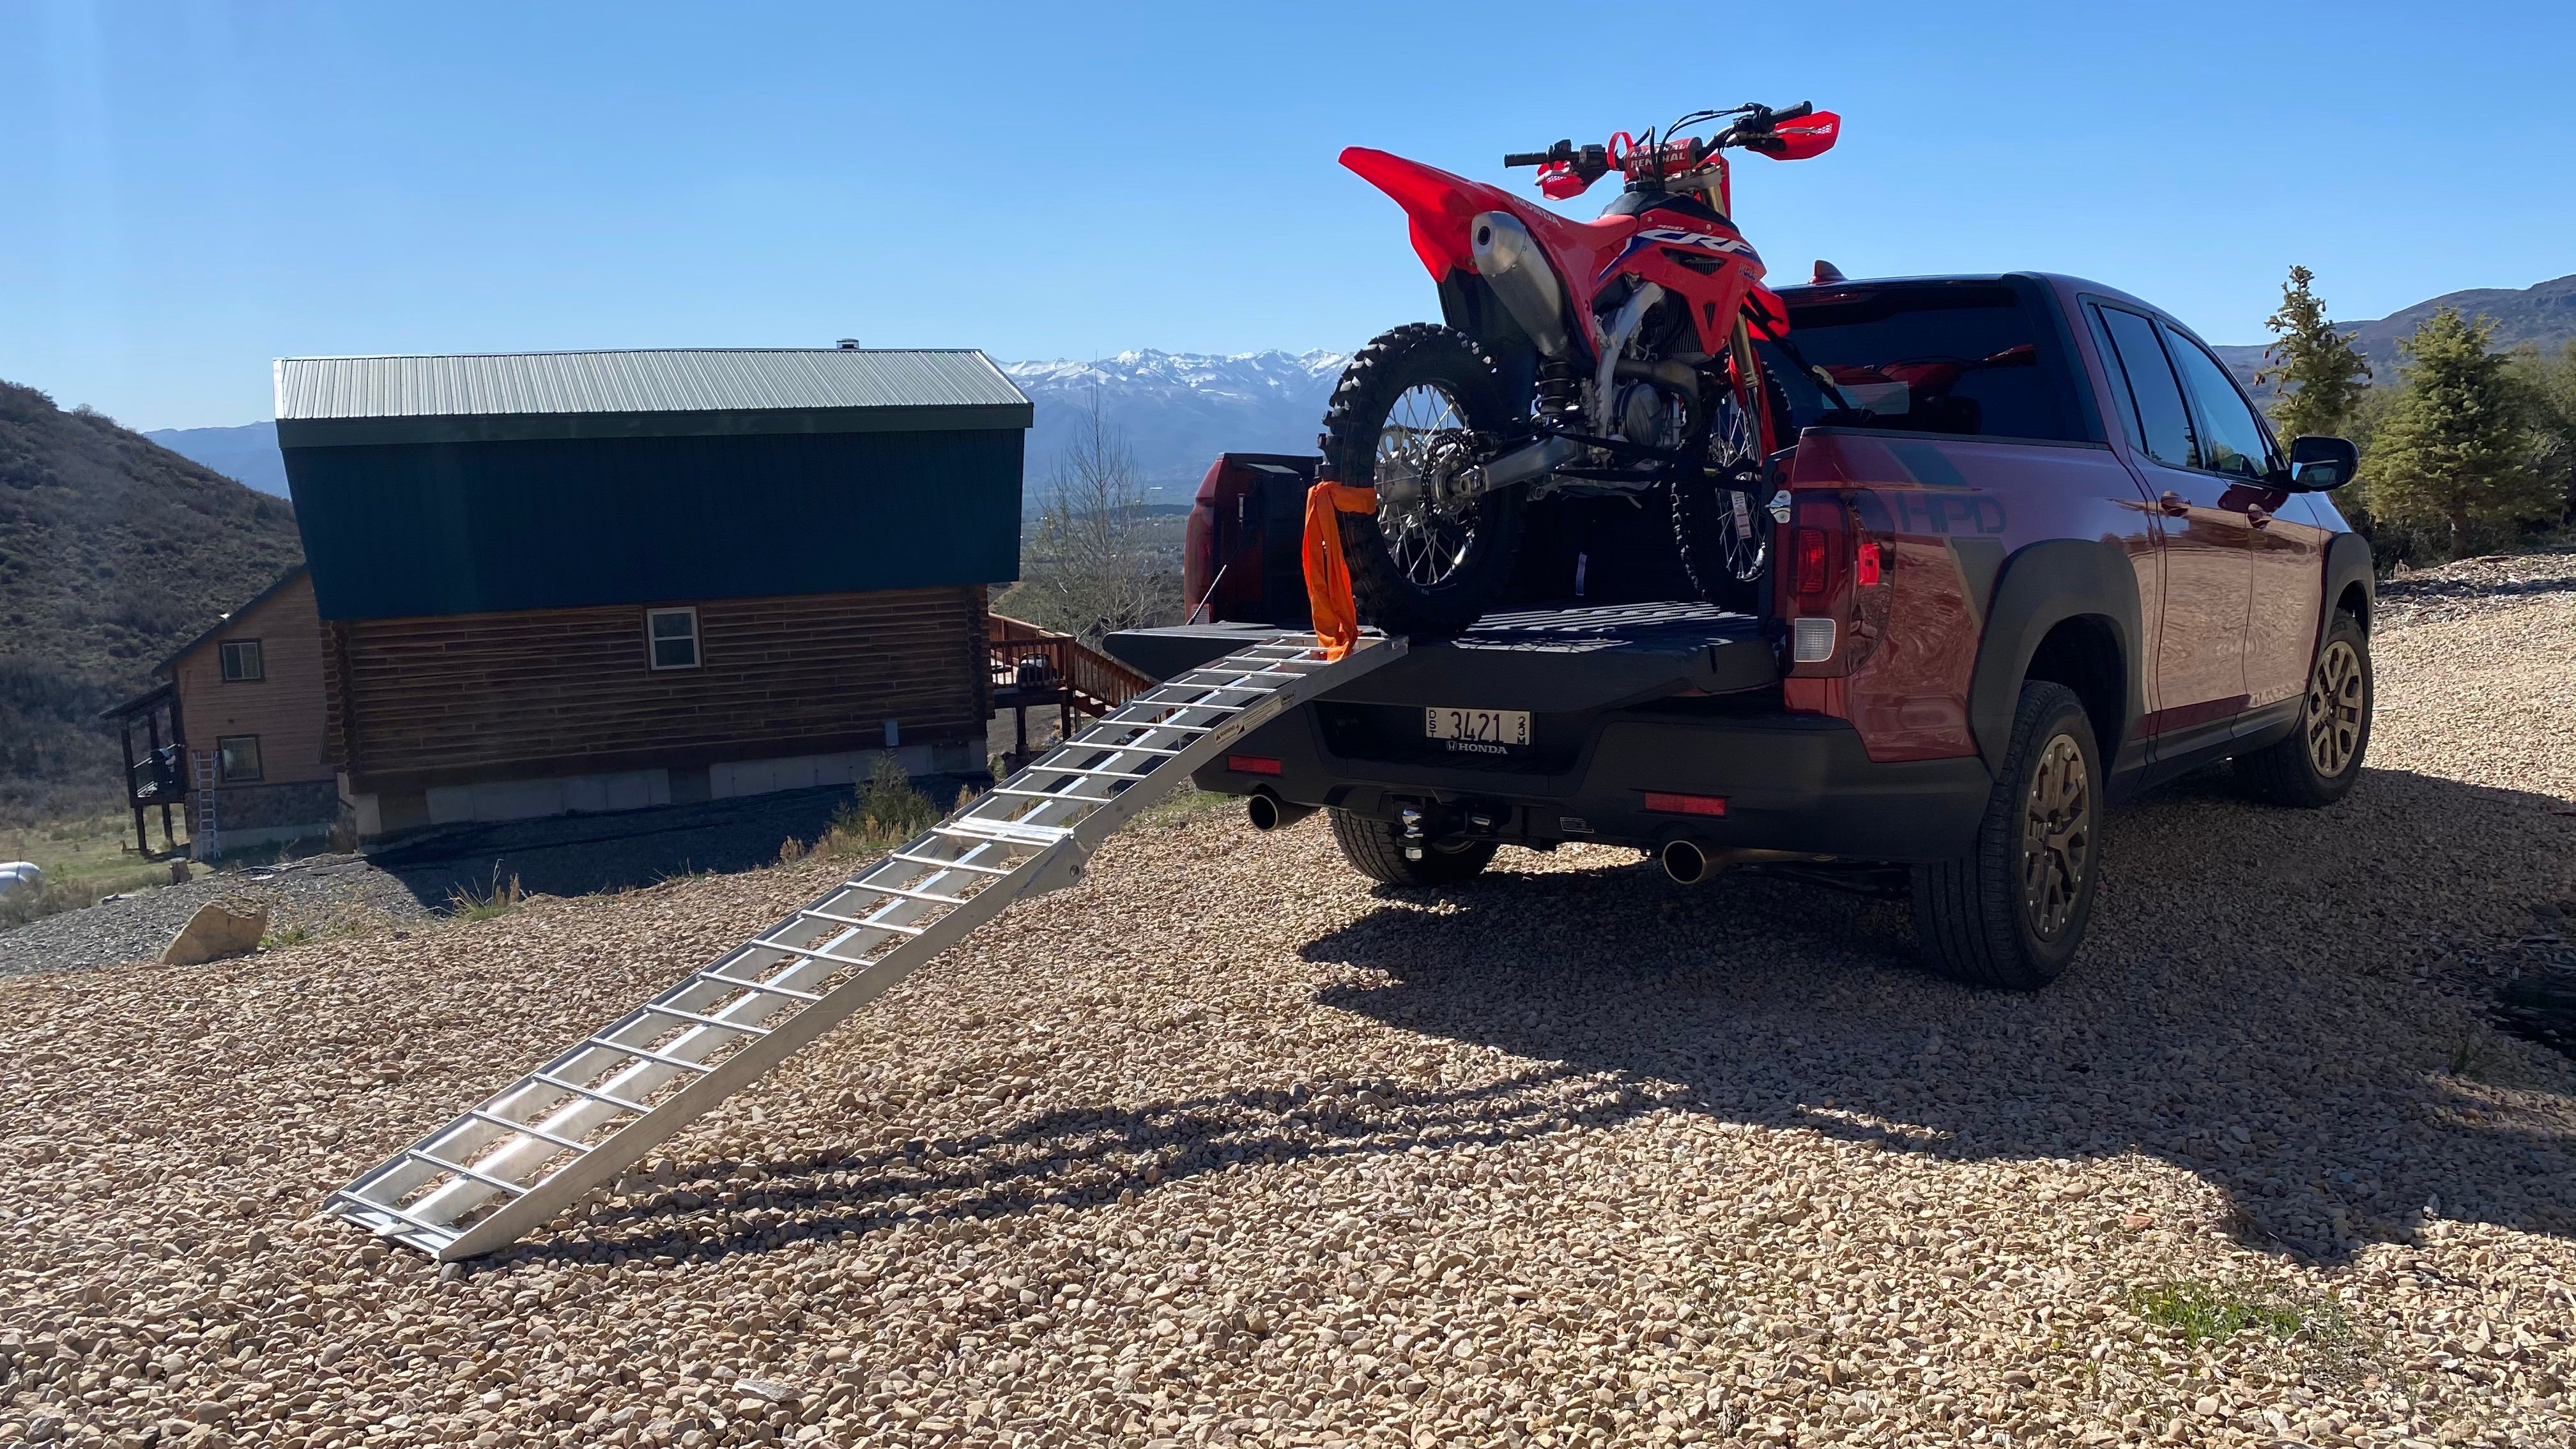 Unloading the CRF450RX.